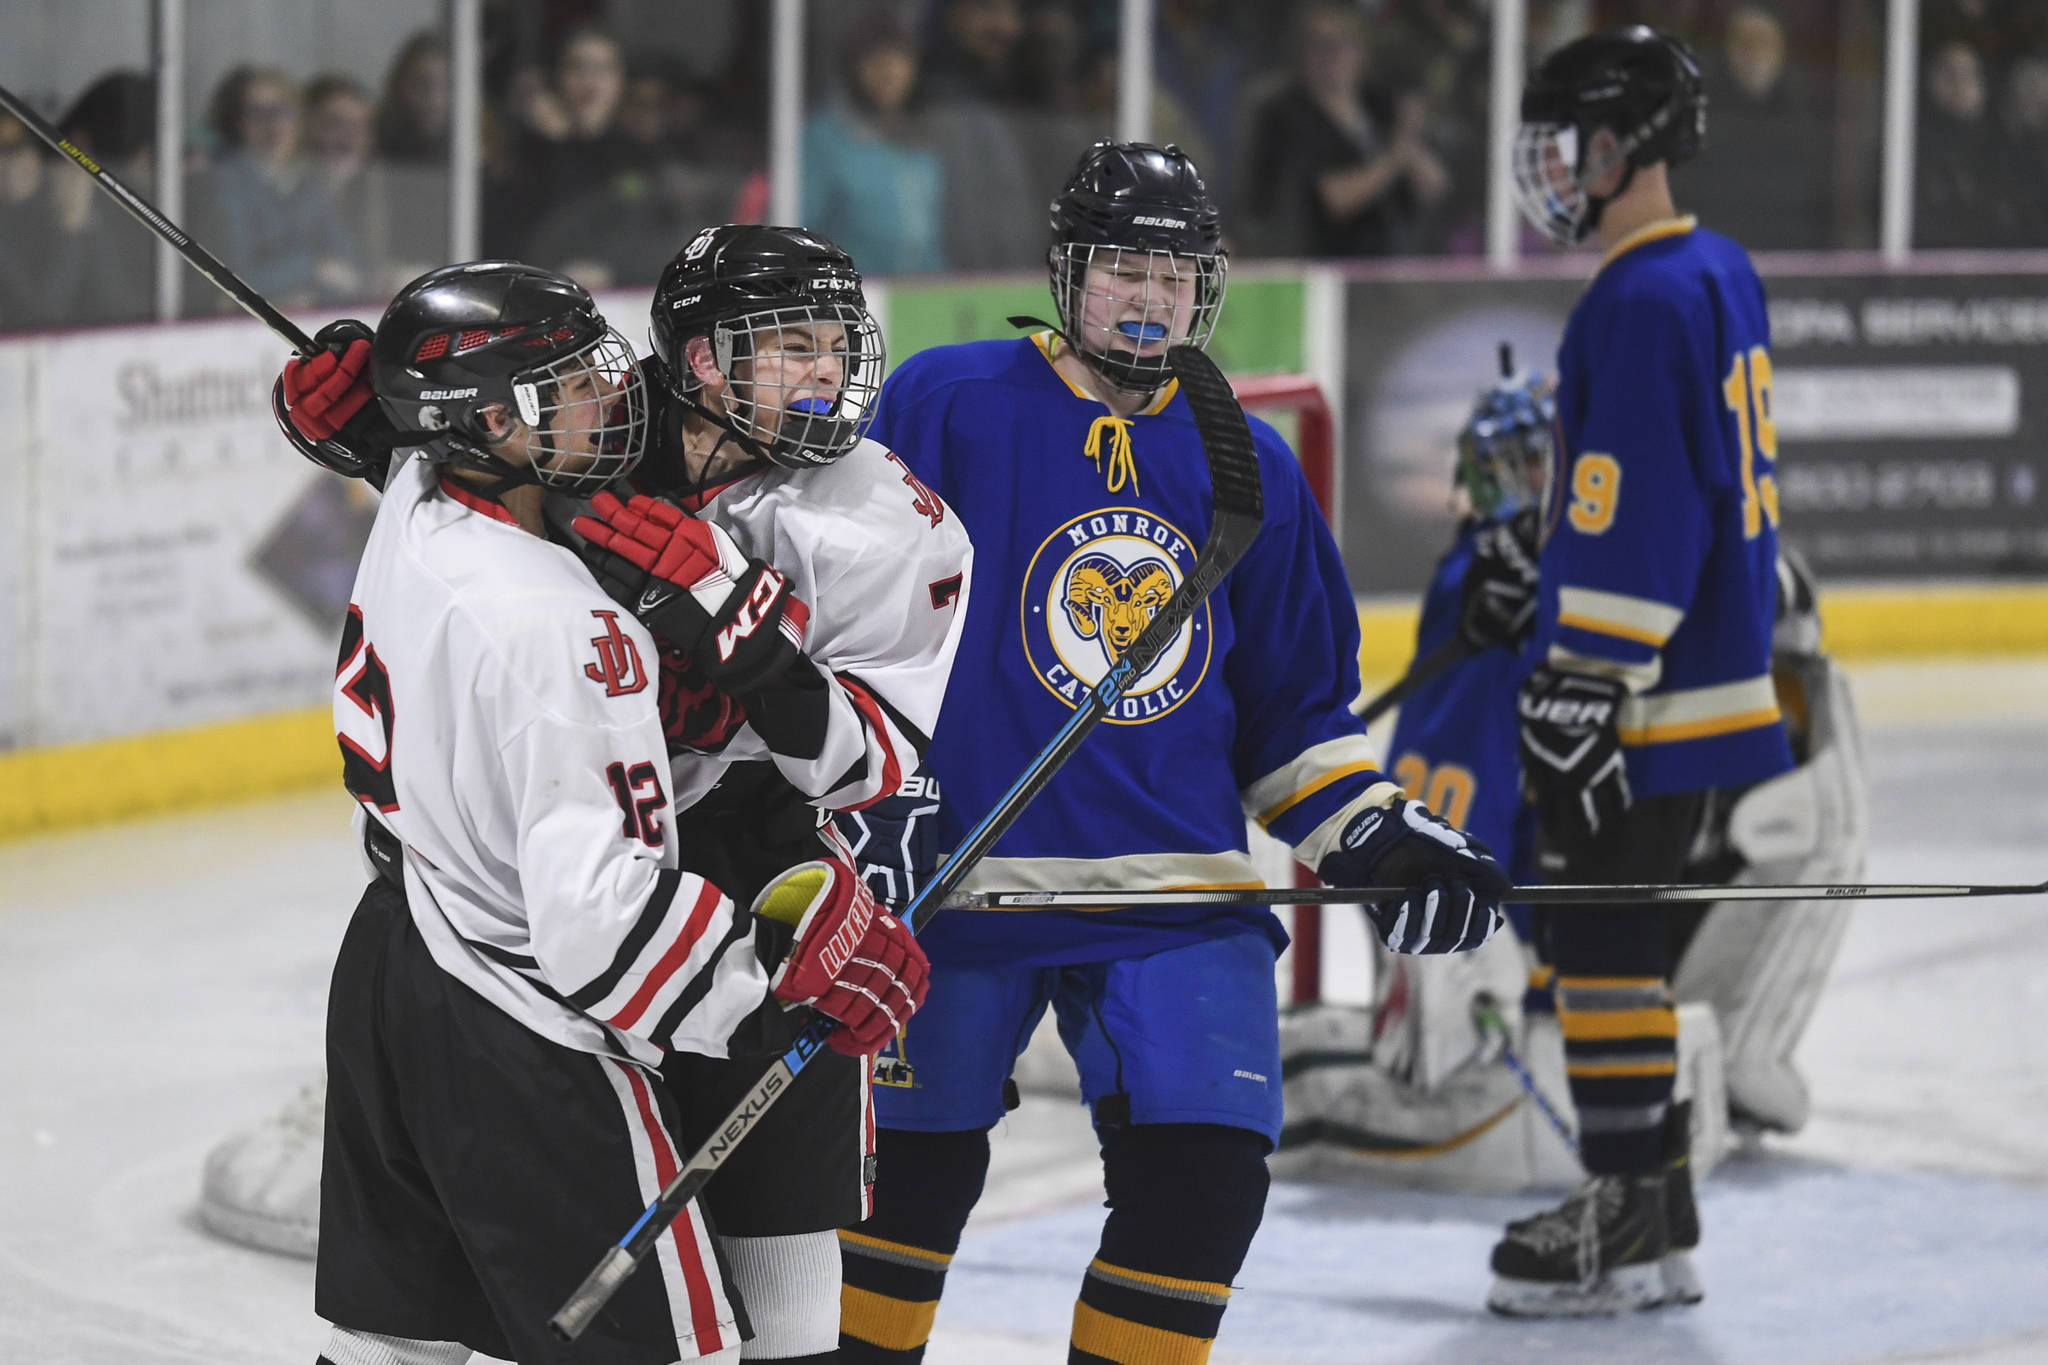 Photos: JDHS hockey shines in home opener